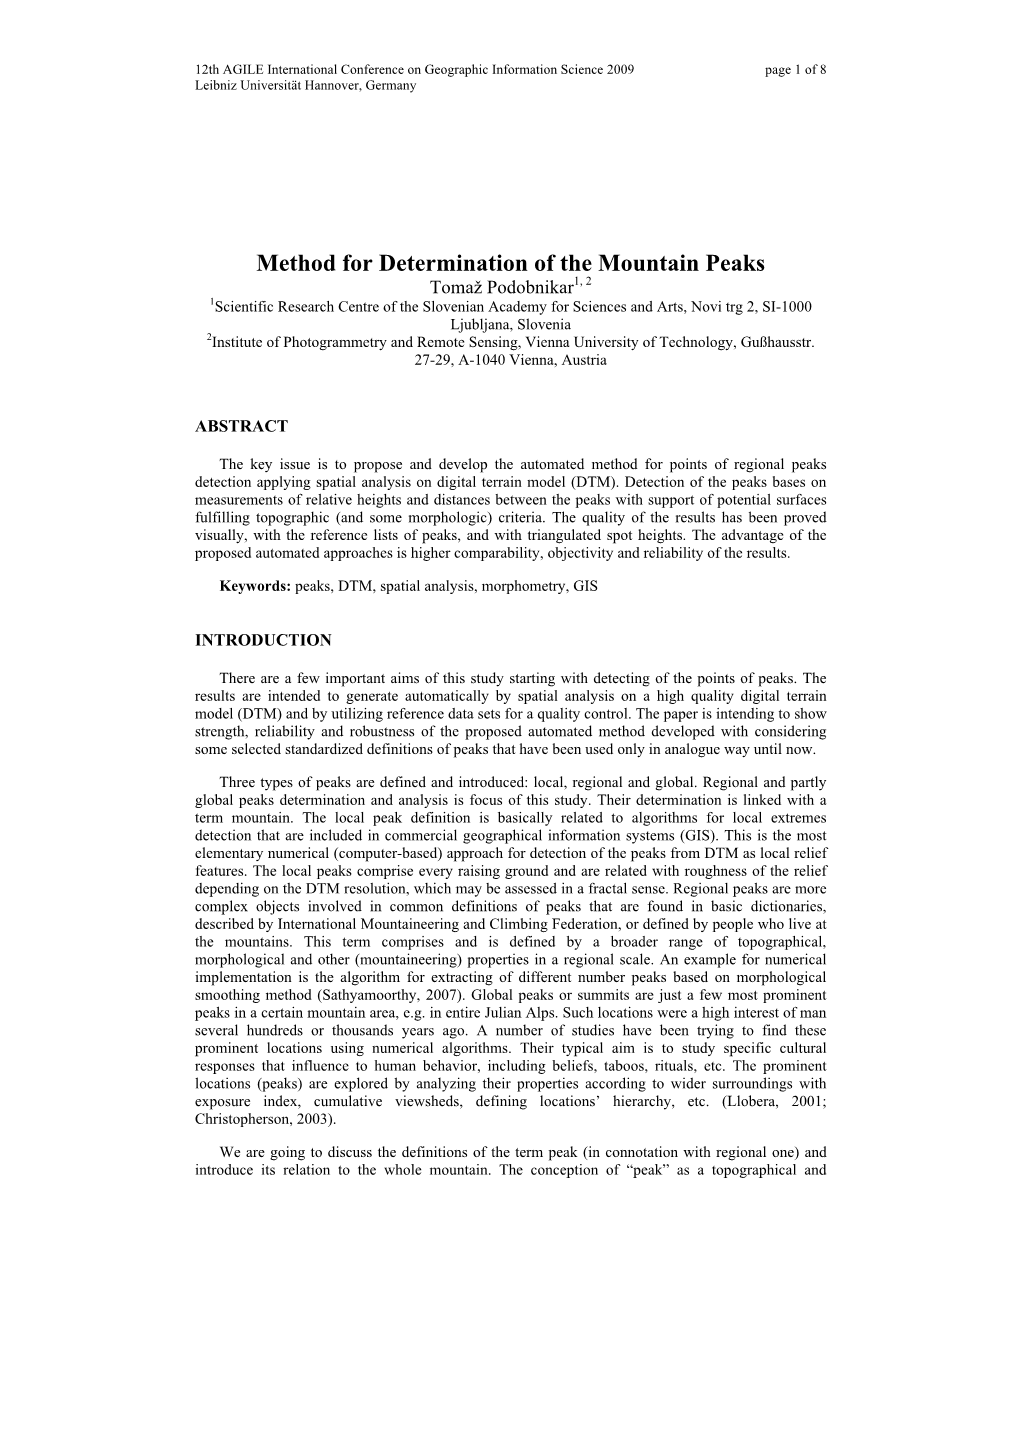 Method for Determination of the Mountain Peaks